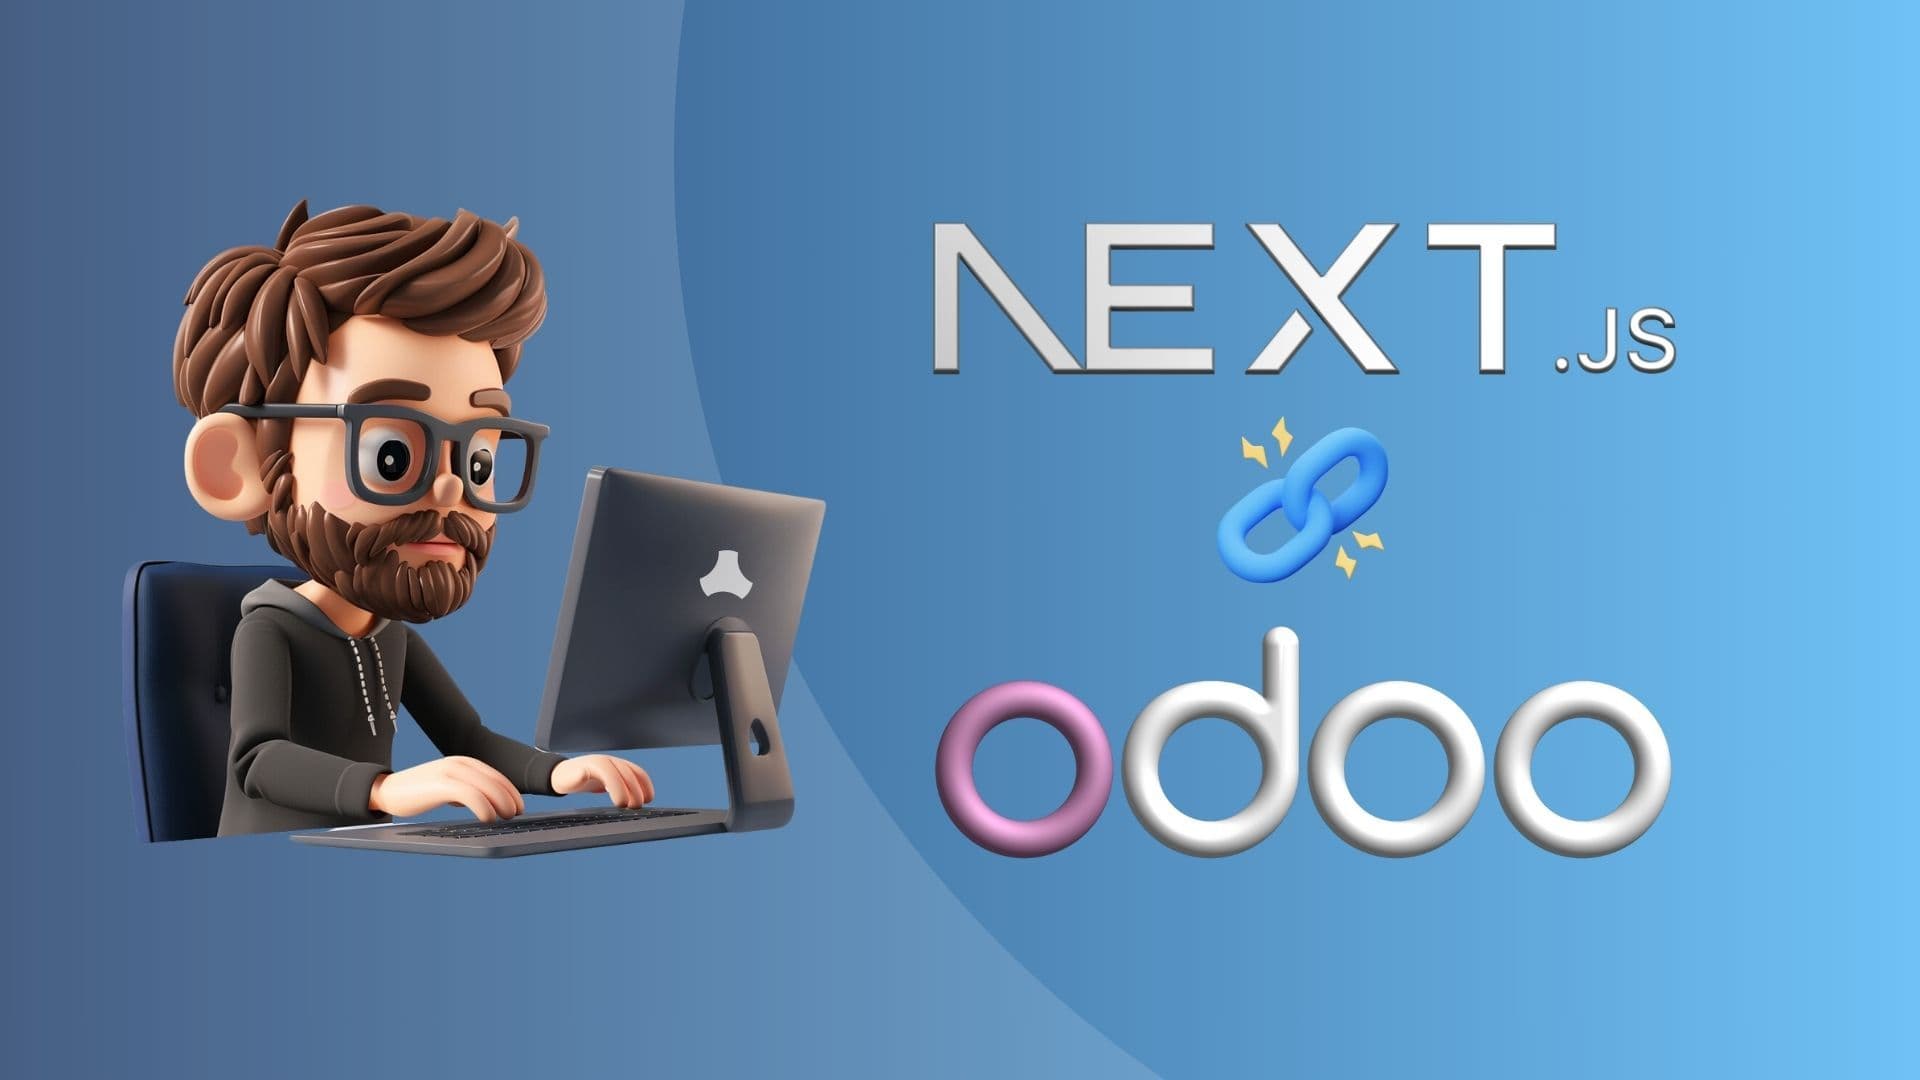 How to Integrate Next.js website with Odoo CRM?